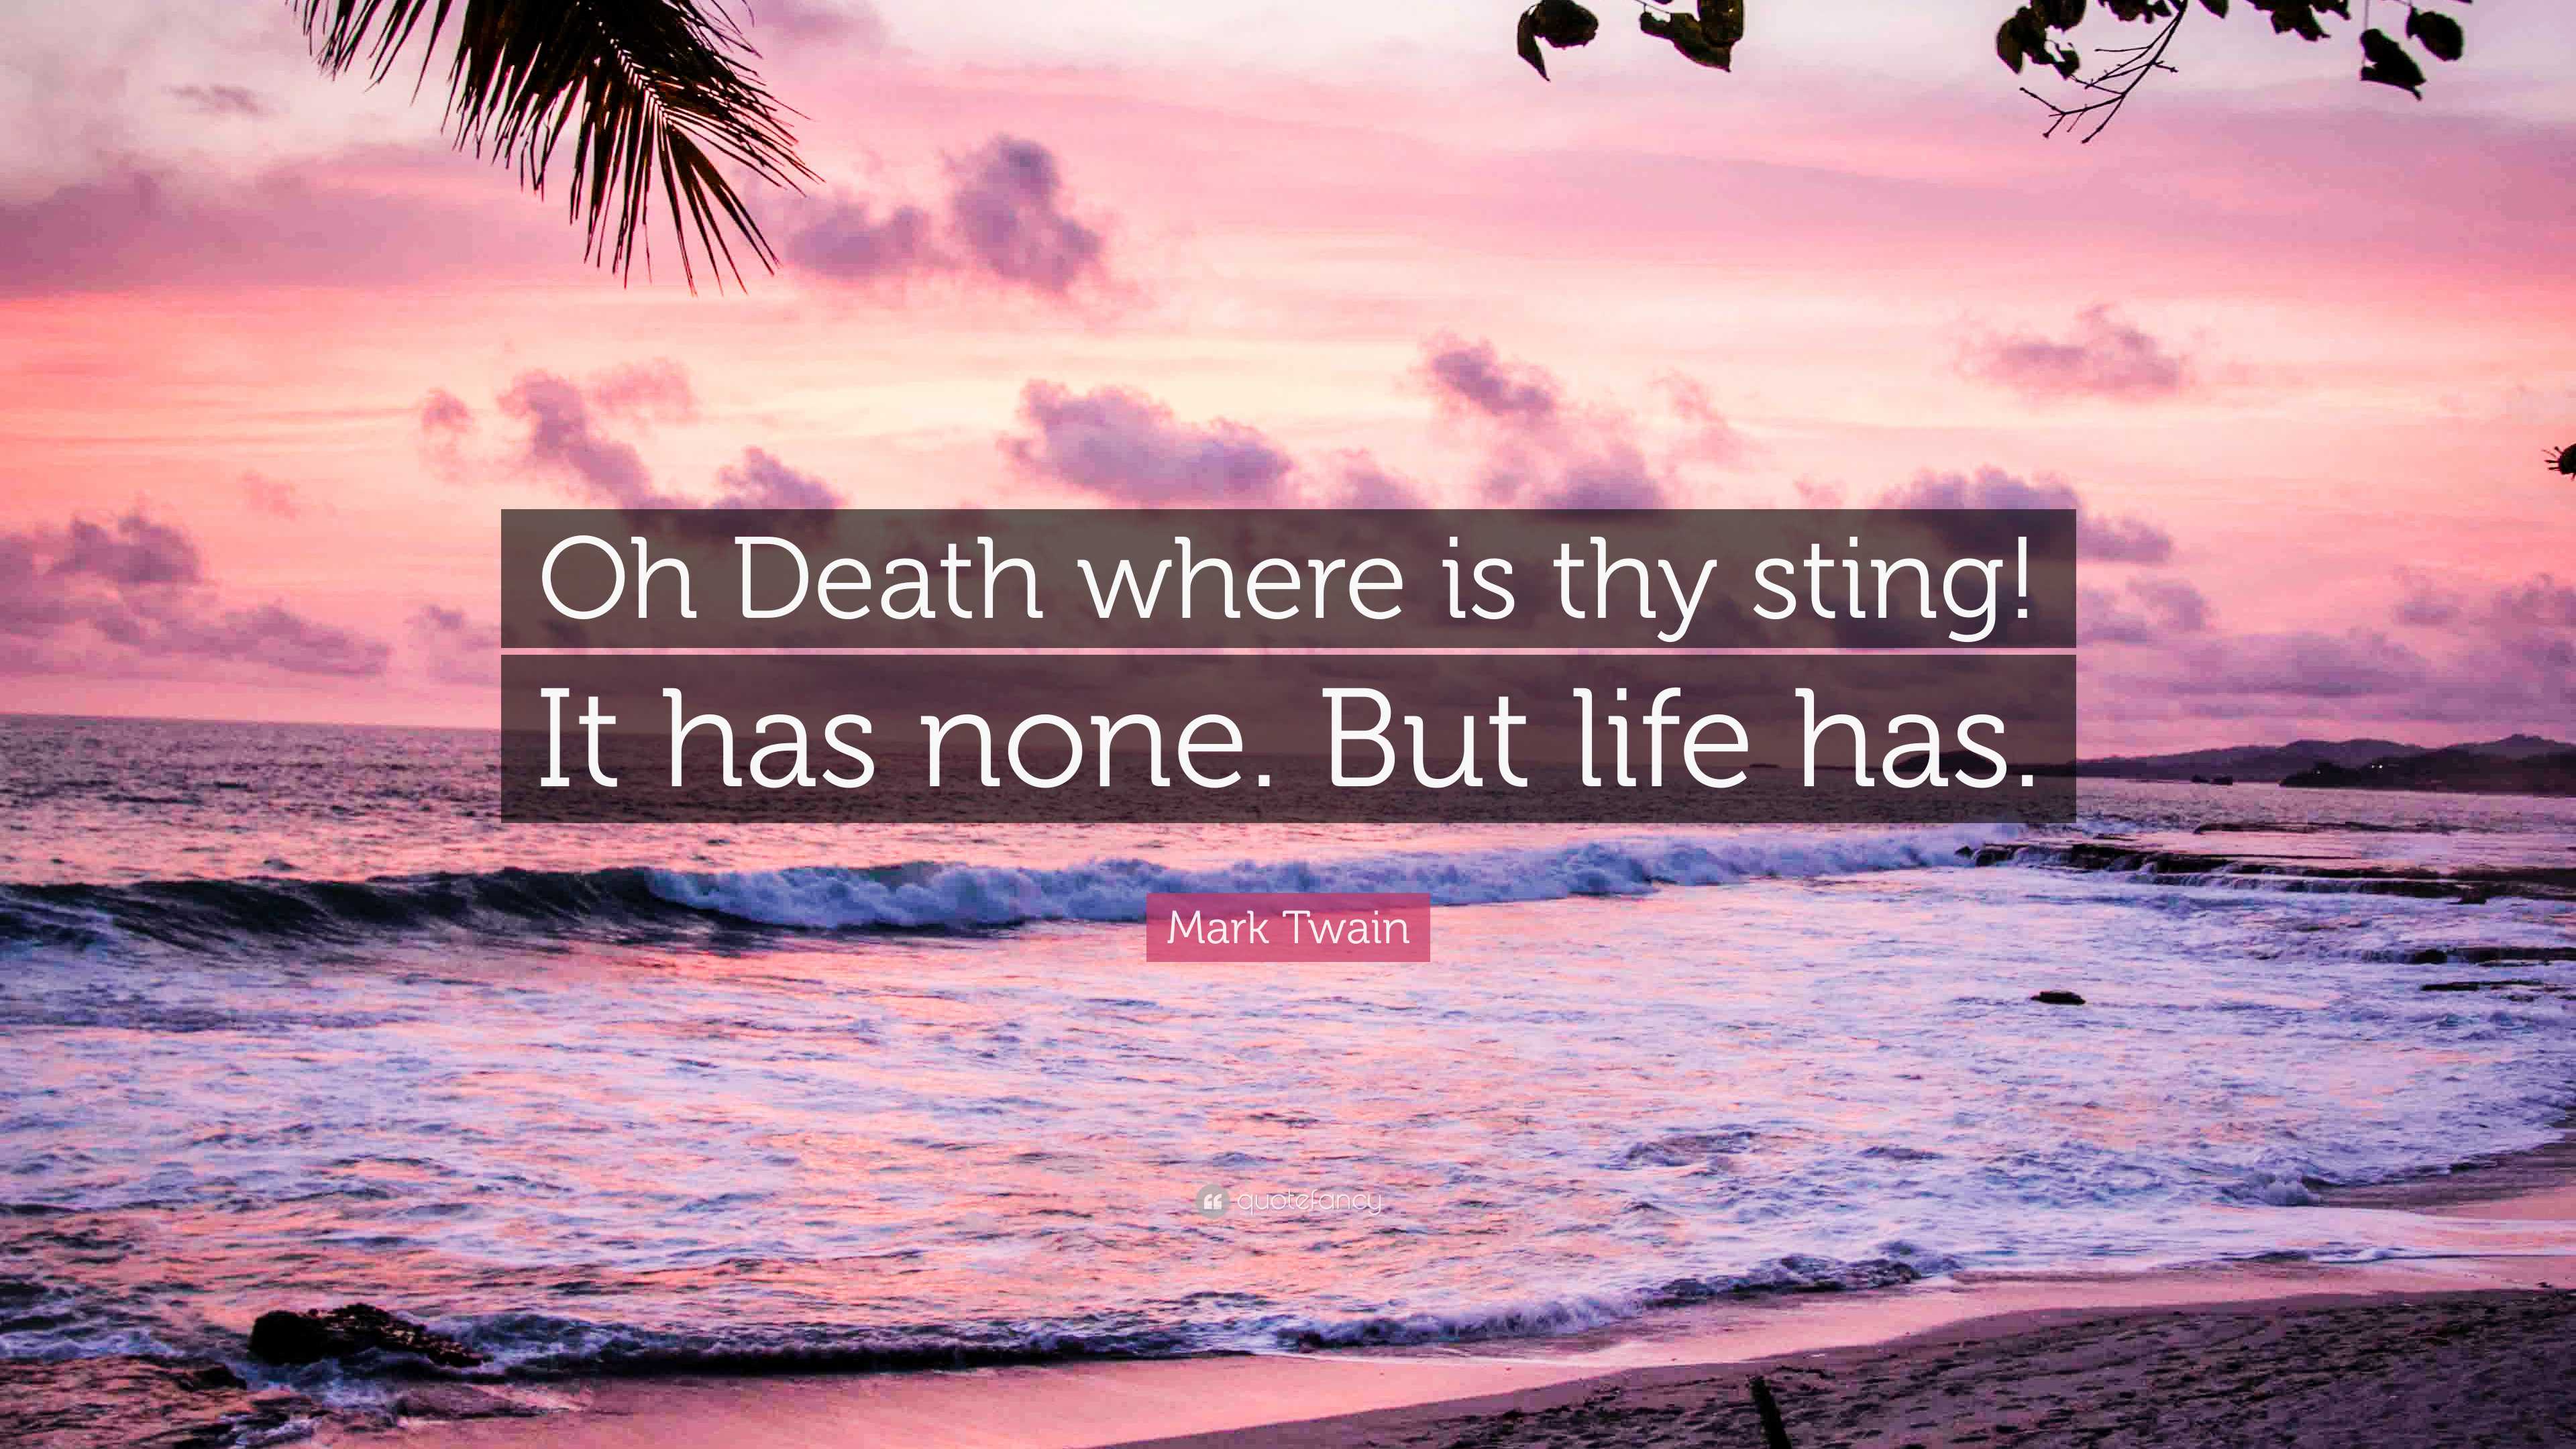 Mark Twain Quote: “Oh Death where is thy sting! It has none. But life has.”